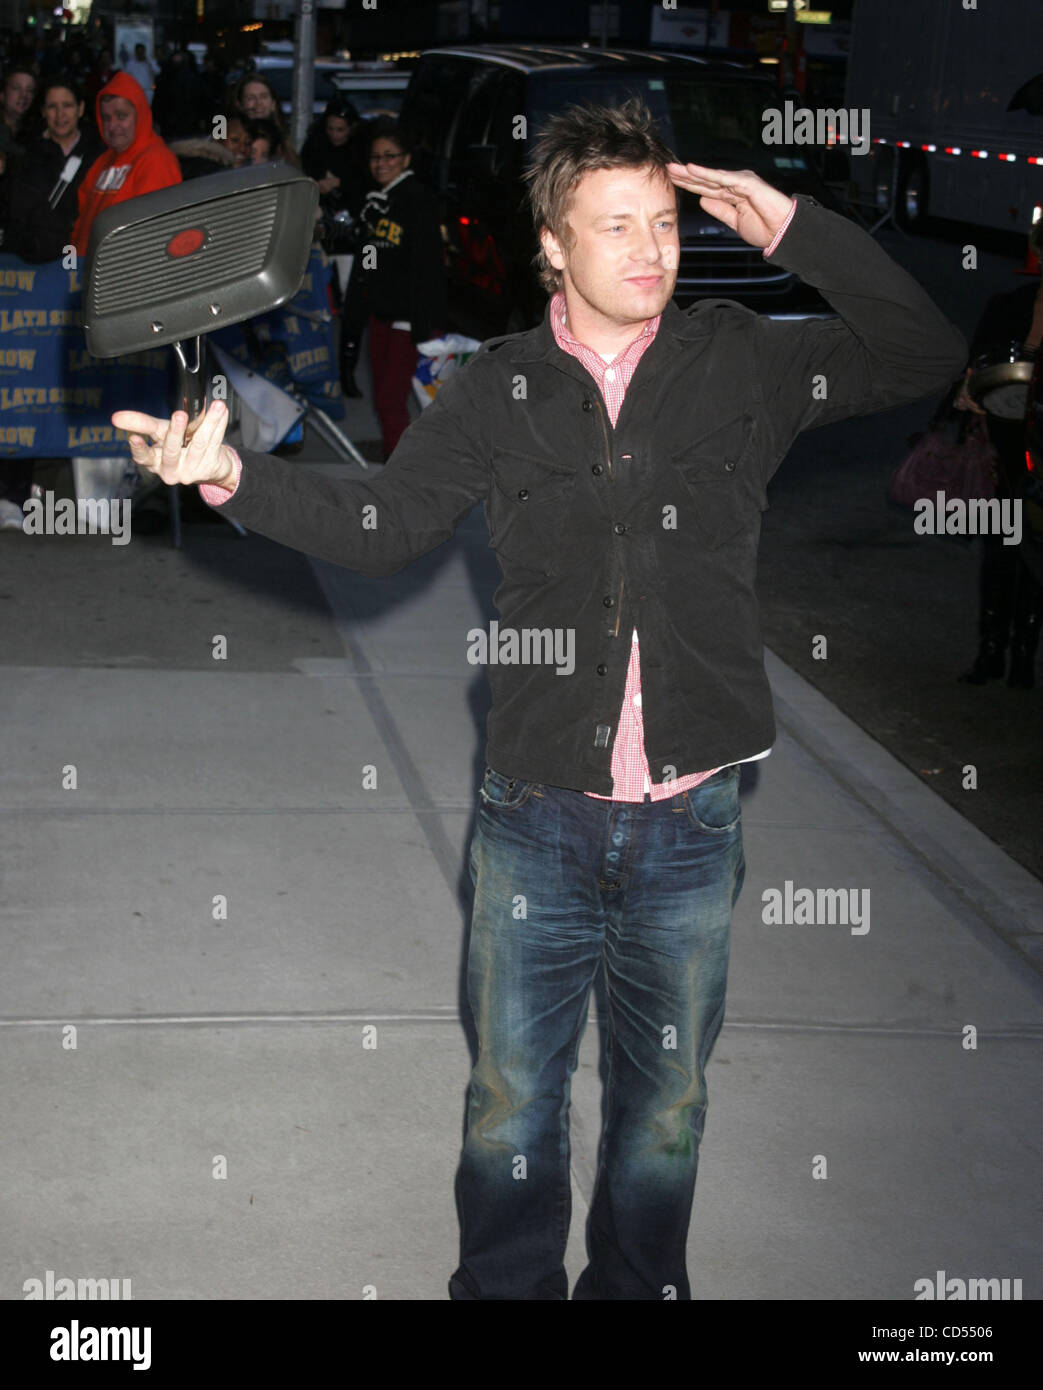 Nov 10, 2008 - New York, NY, USA - Chef JAMIE OLIVER twirls a frying pan at his appearance on 'The Late Show With David Letterman' held at the Ed Sullivan Theater.  (Credit Image: ZUMApress.com) Stock Photo